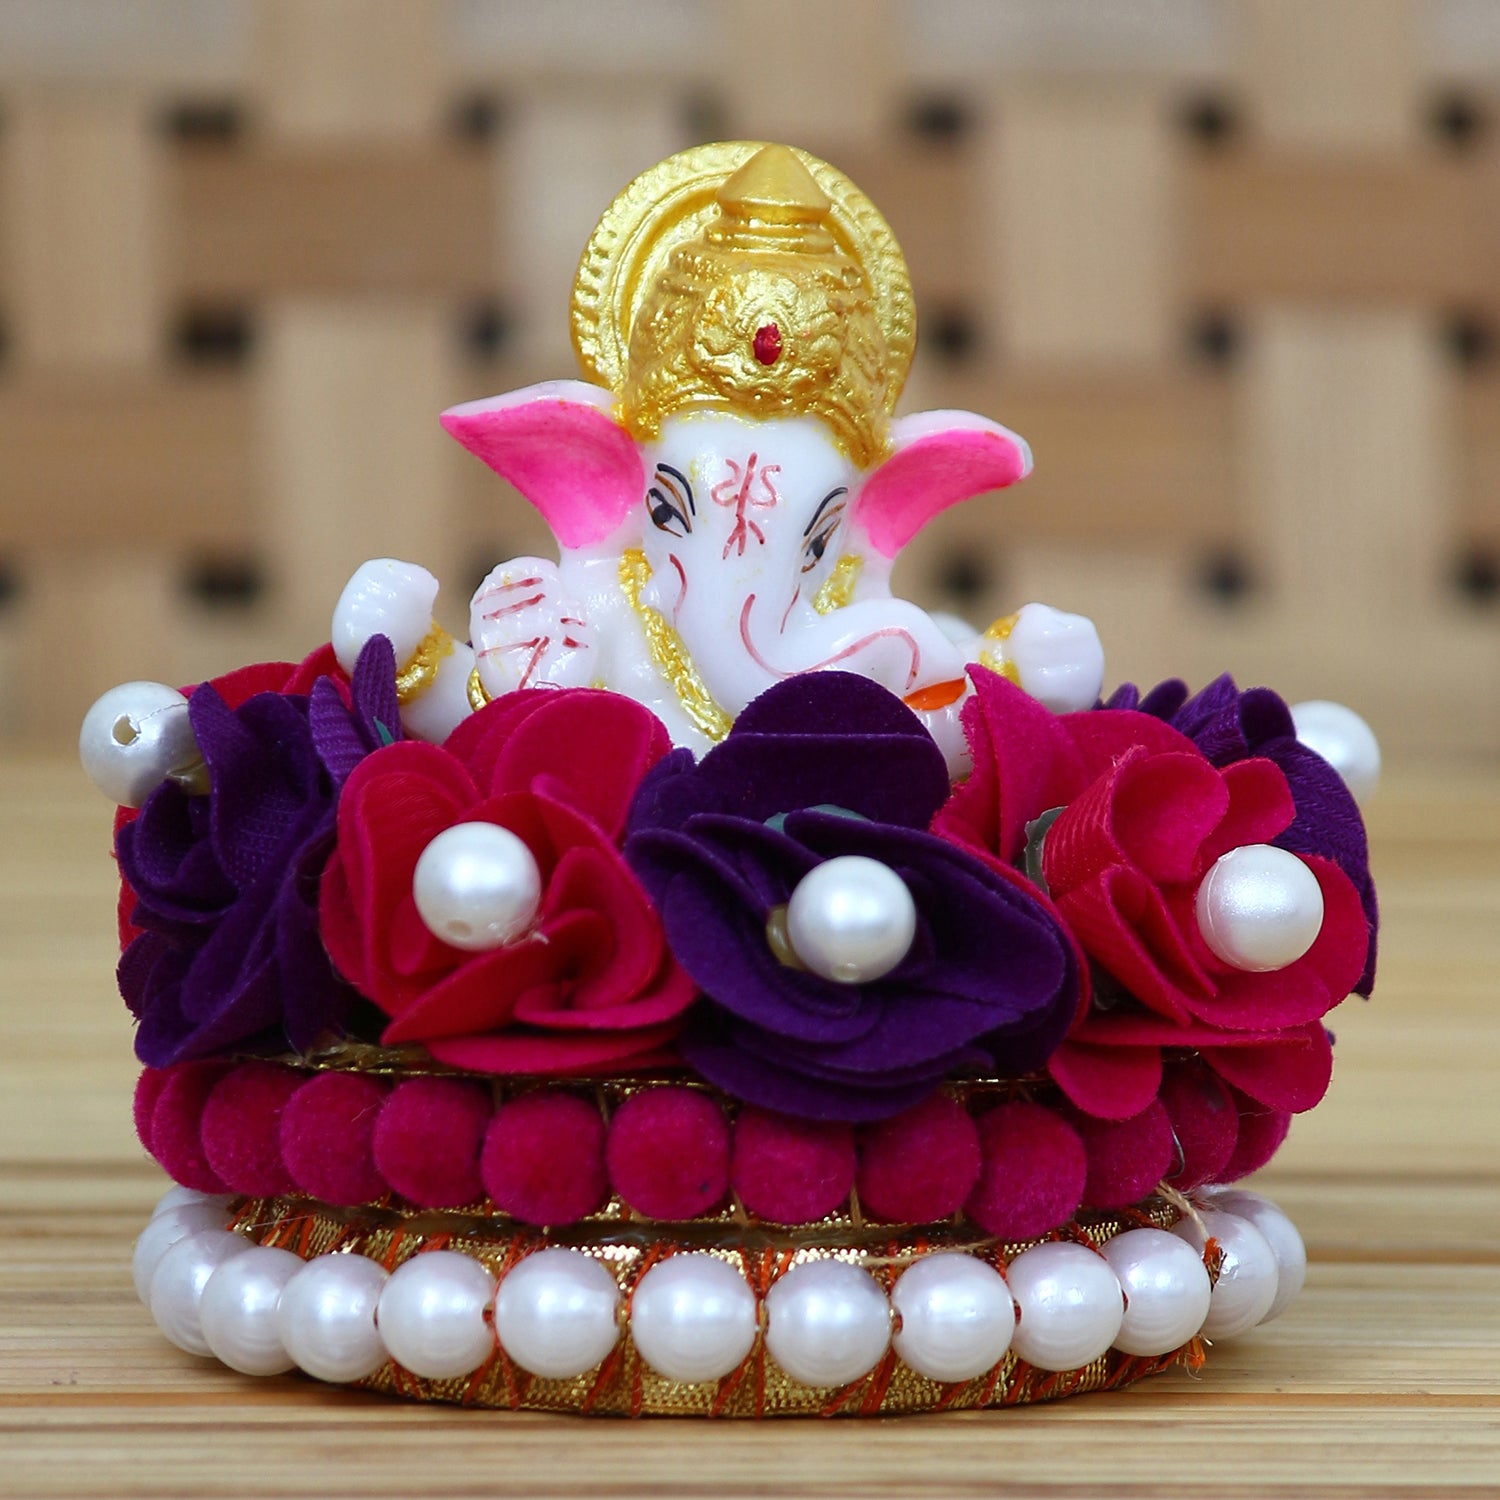 Lord Ganesha Idol On Decorative Handcrafted Red And Purple Flowers Plate 1